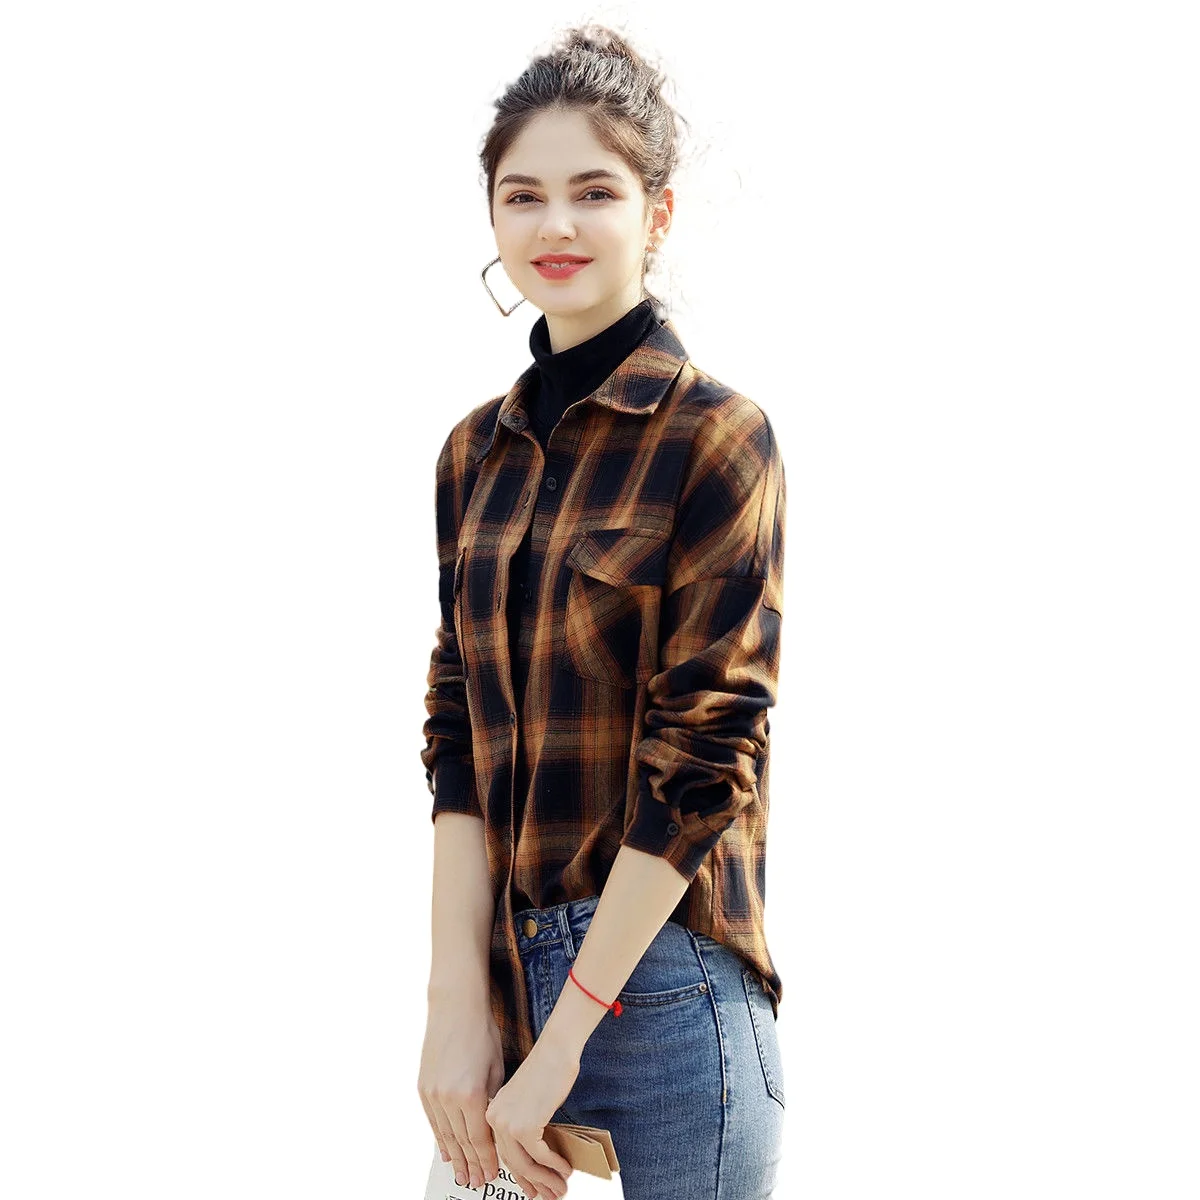 Brushed Plaid Shirt Ladies Long Sleeve Spring 2021 New All-match Ladies Top